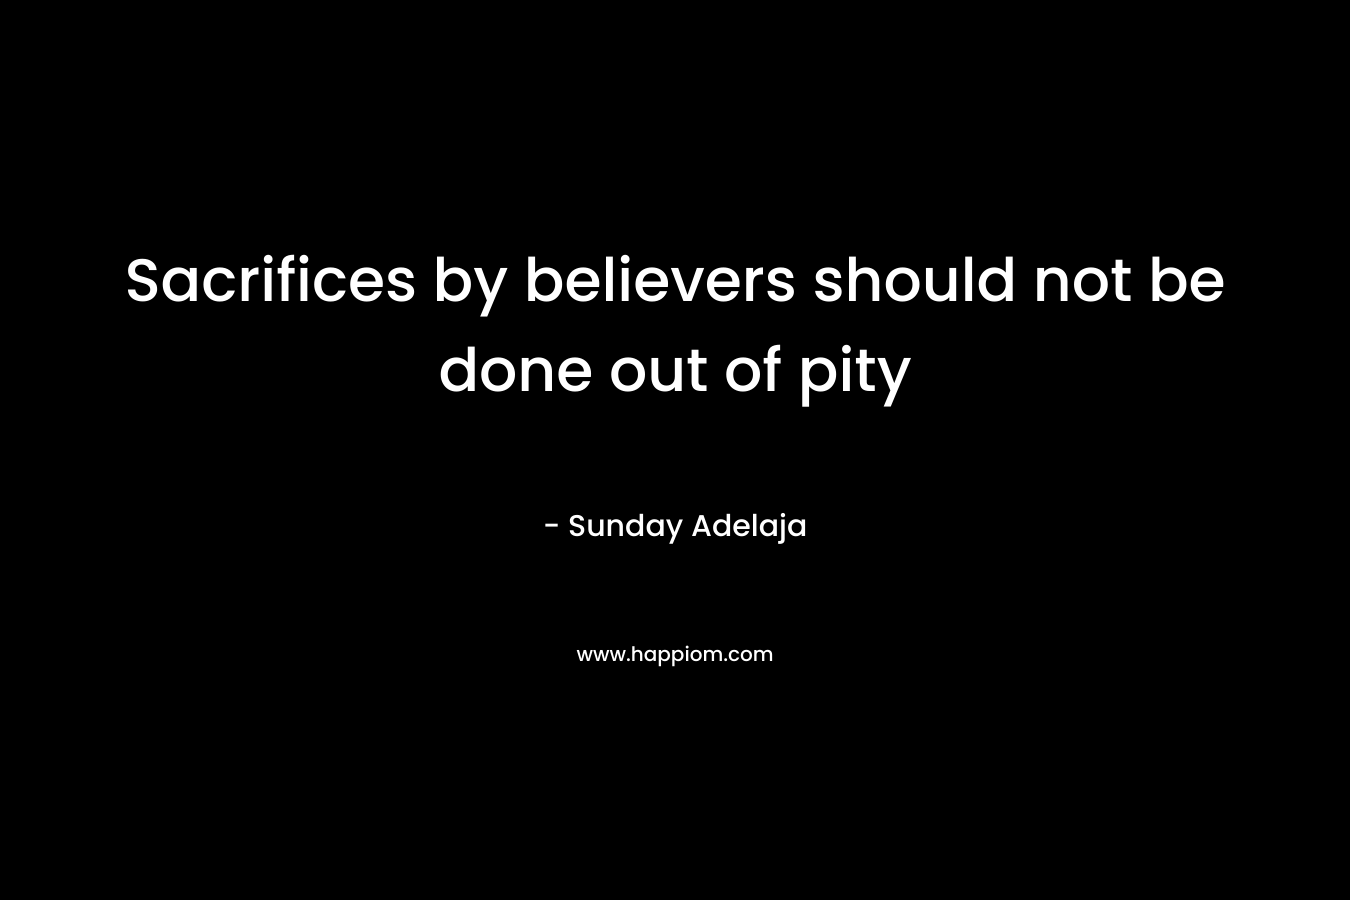 Sacrifices by believers should not be done out of pity